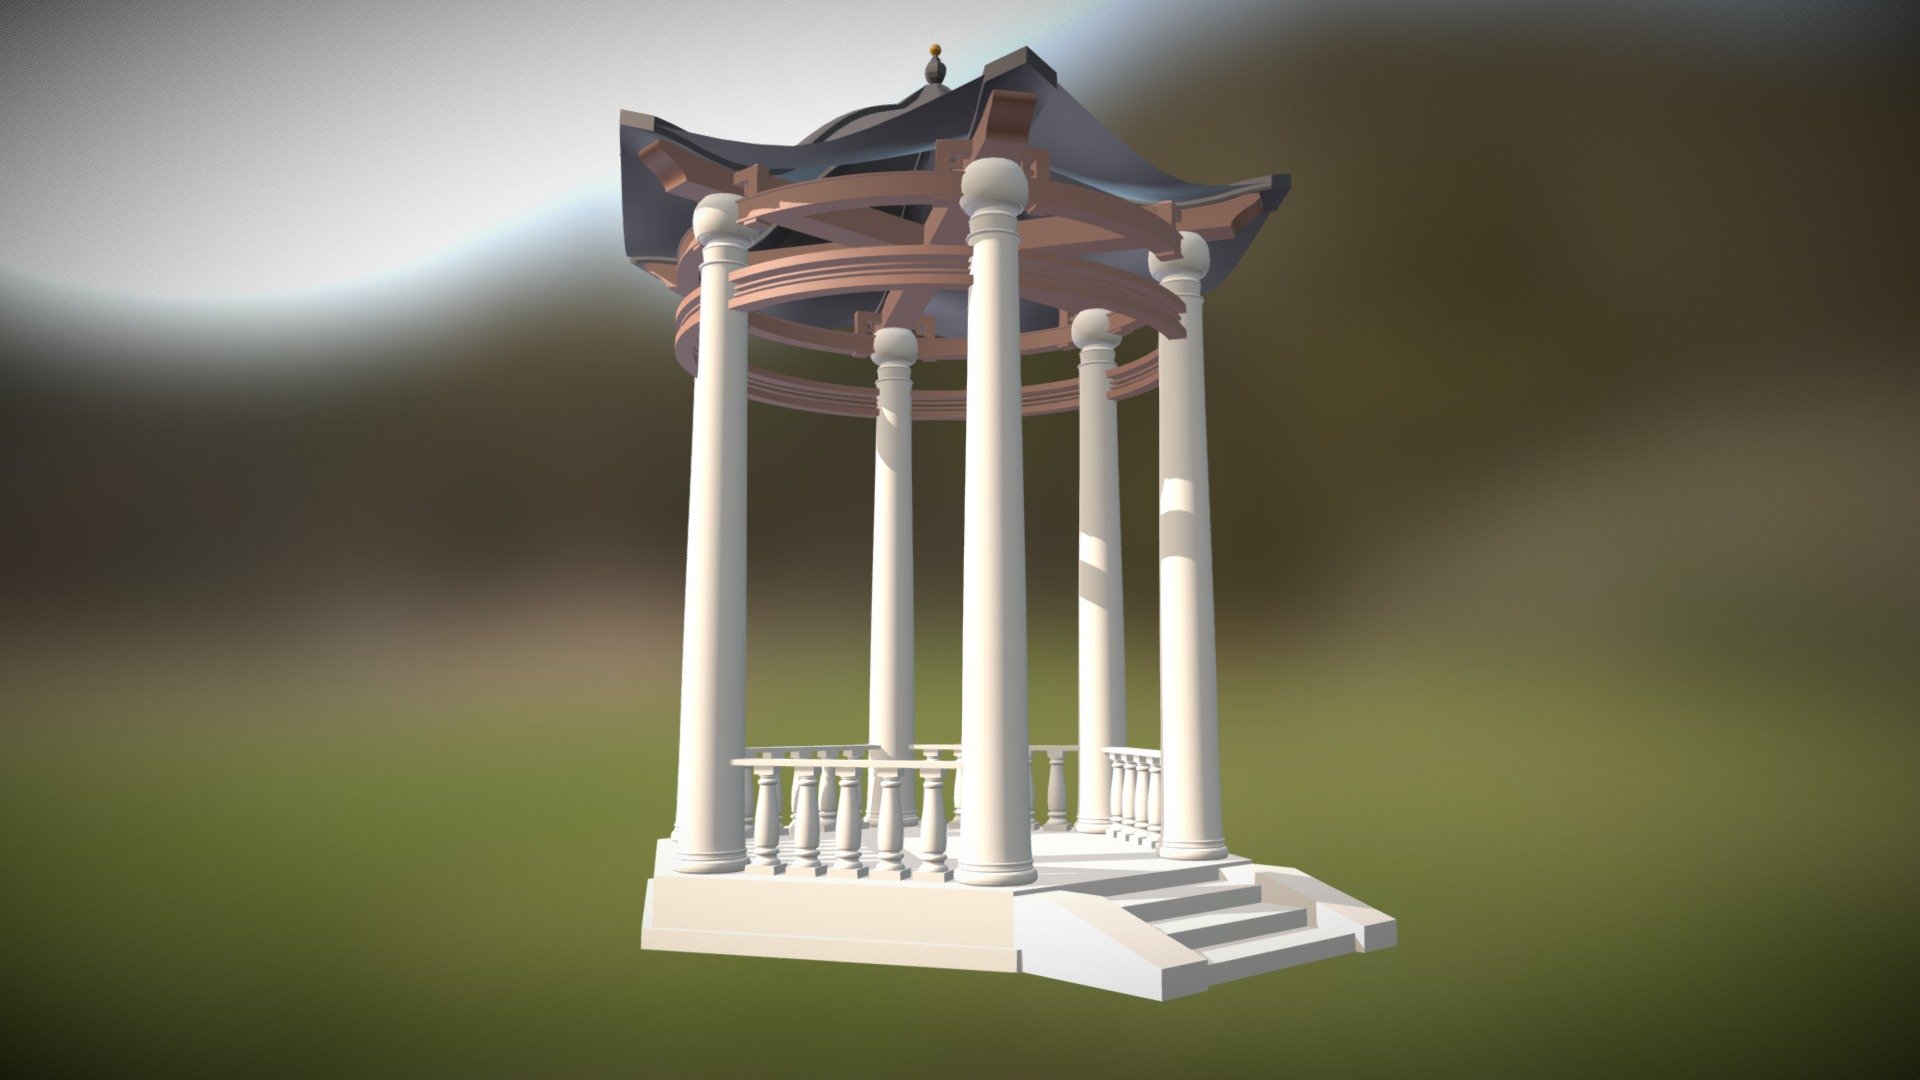 A friend of mine challenged me to build a gazebo that was influenced by both Japanese and Roman architecture. So why not? - Gazebo - 3D model by stobak 3d model